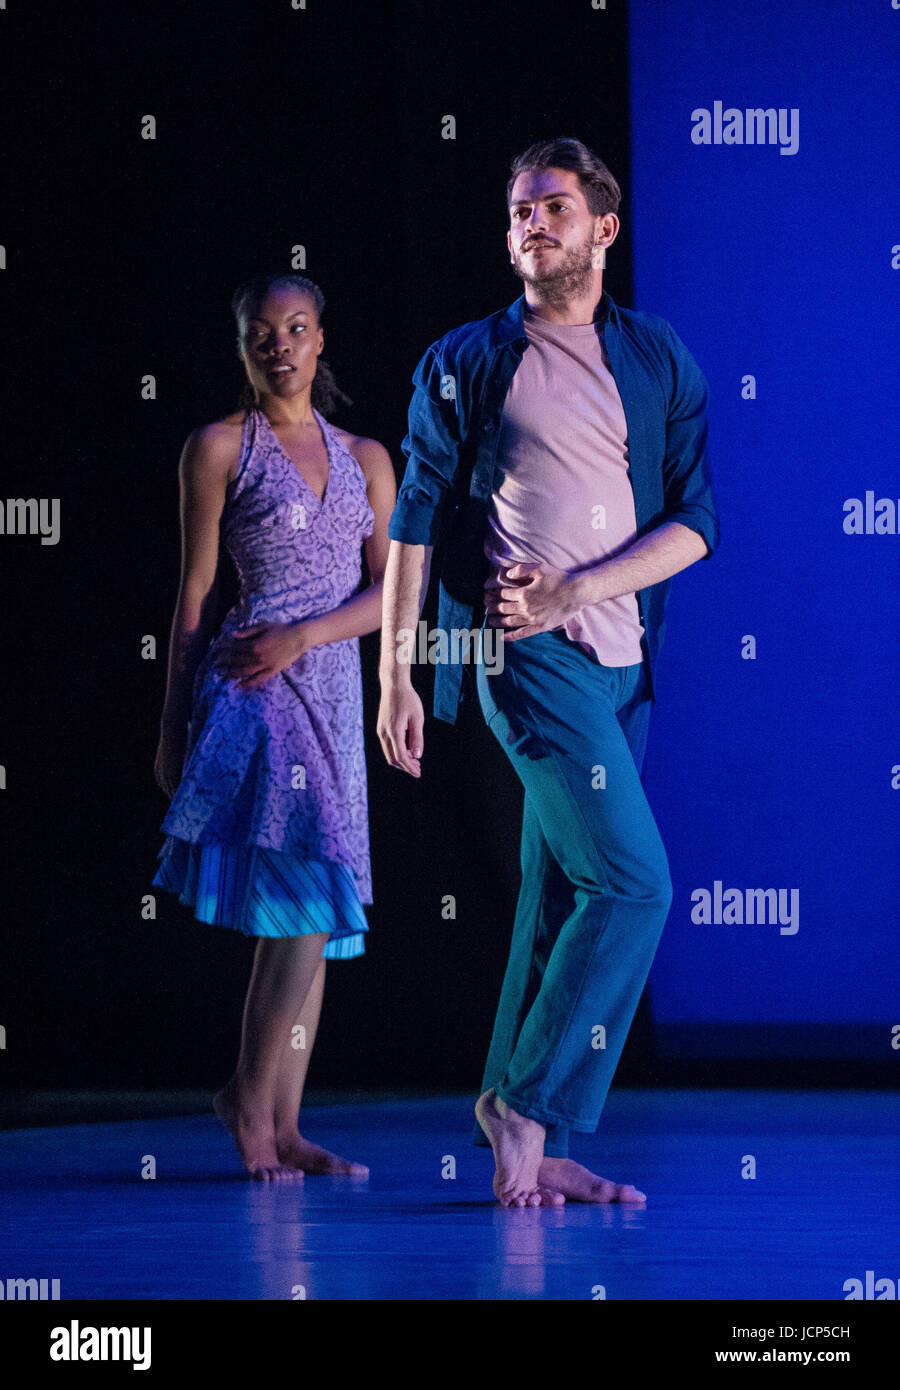 LONDON, UNITED KINGDOM - JUNE 16: Richard Alston Dance Company perform Tangent, Chicory Gypsy Mixture at Sadlers Wells on June 16th, 2017 in London, England. Credit: Gary Mitchell/Alamy Live News Stock Photo